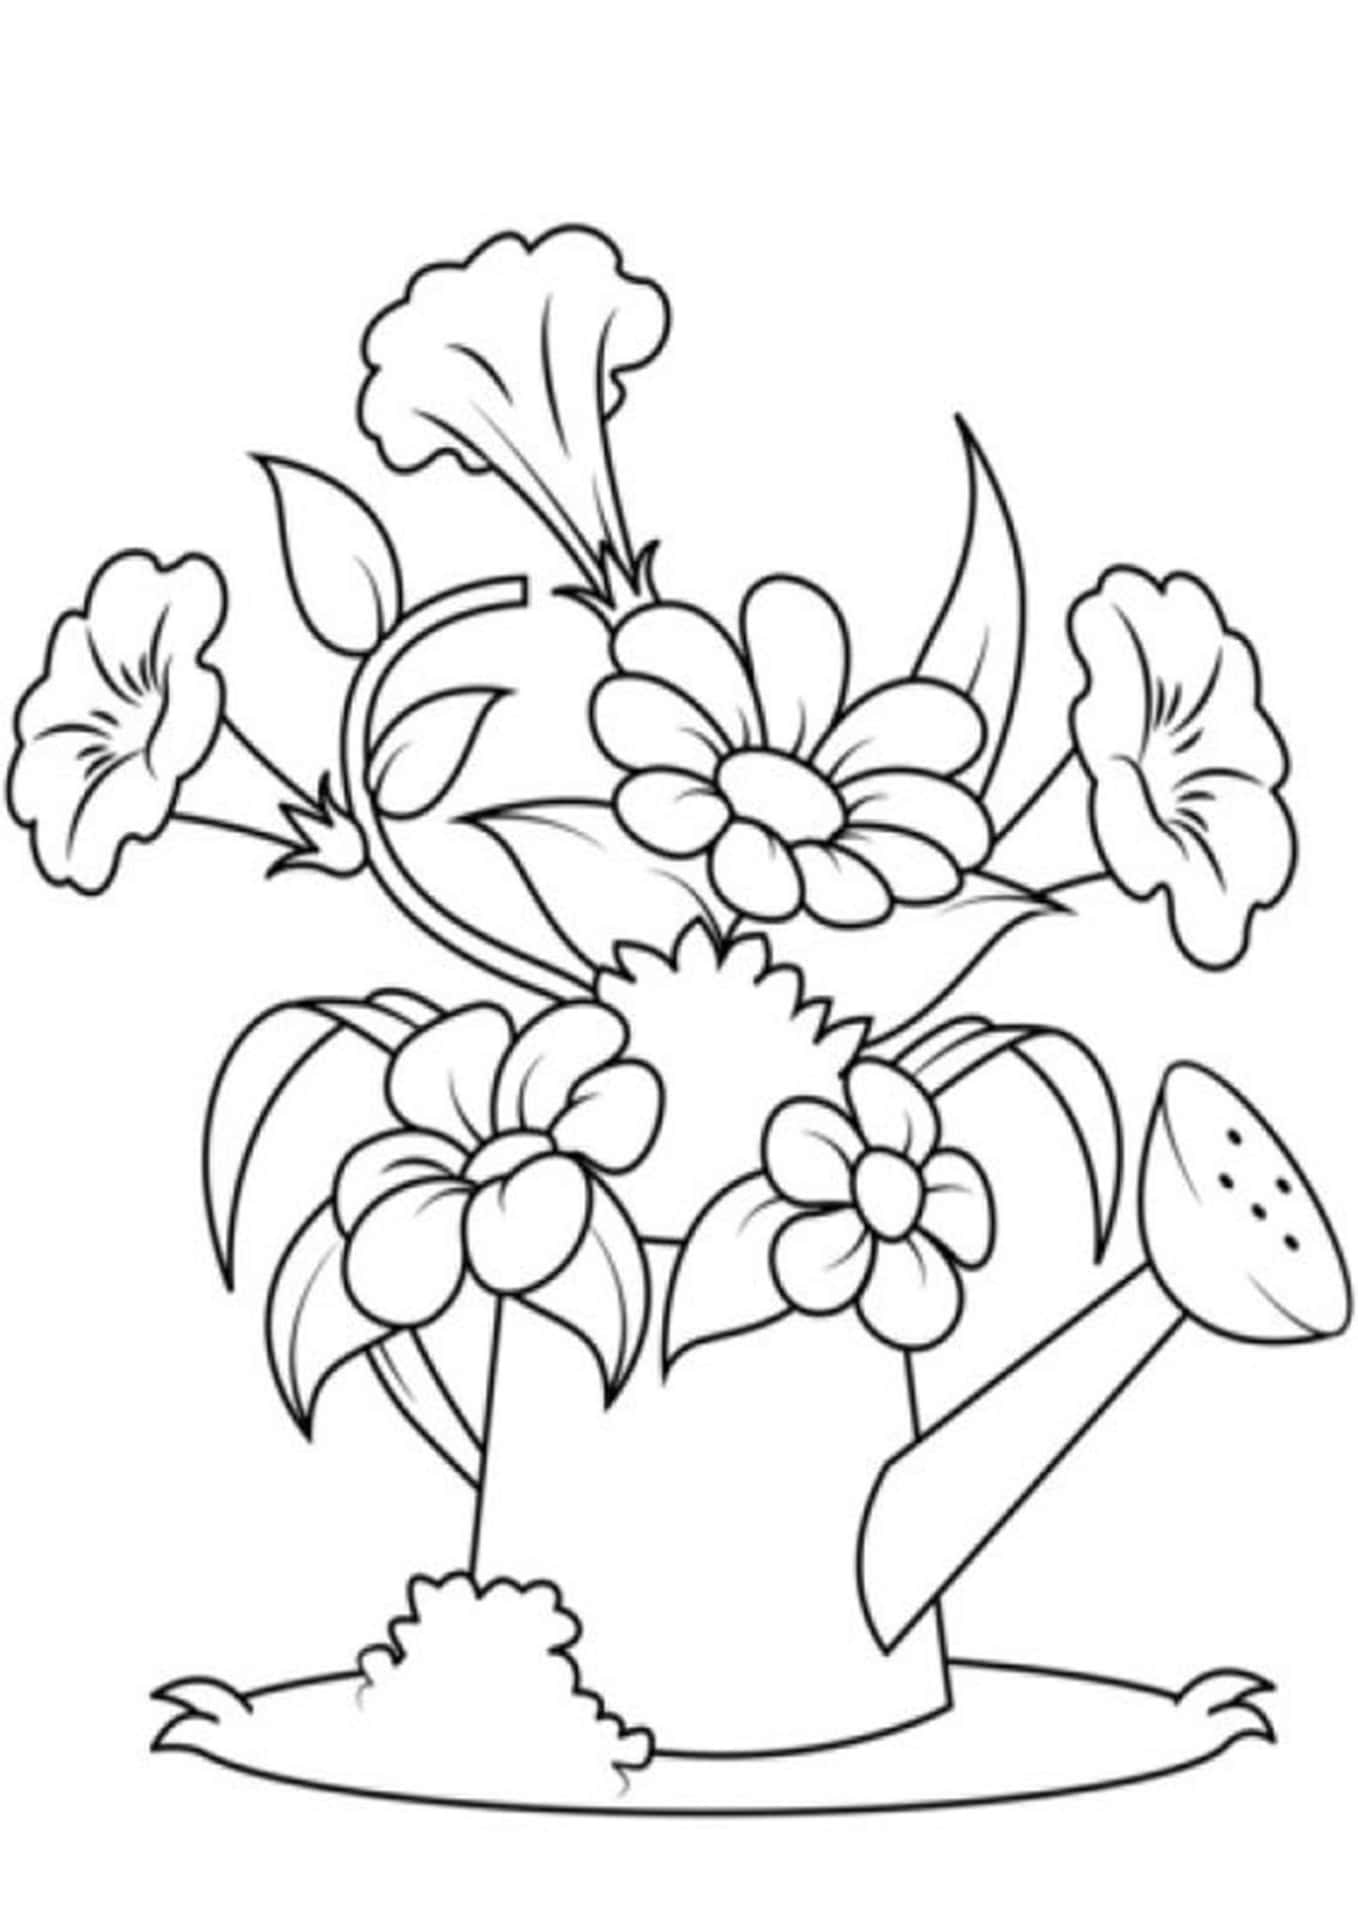 Fun and Creative Cute Coloring Pages